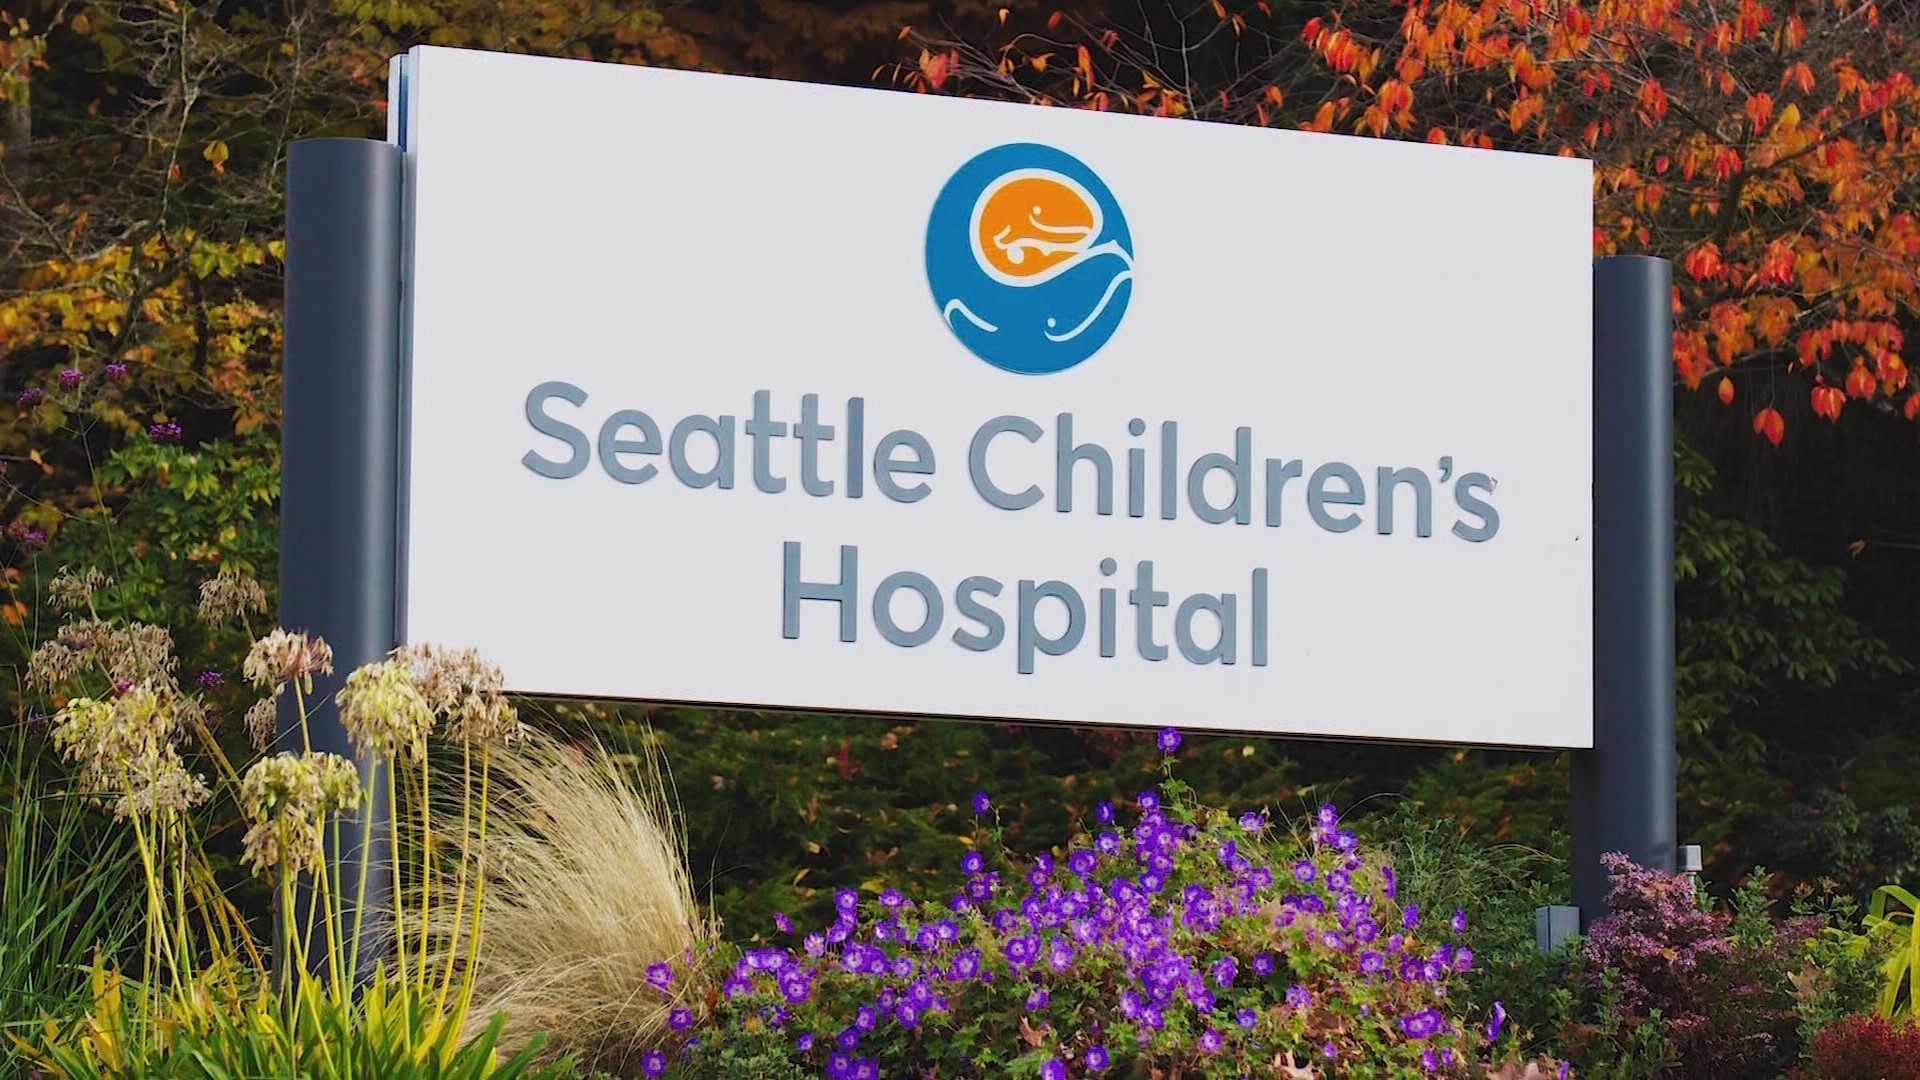 Seattle Children's Hospital has closed all operating rooms after tests showed mold in its ventilation system. The mold is blamed for the death of one young patient.